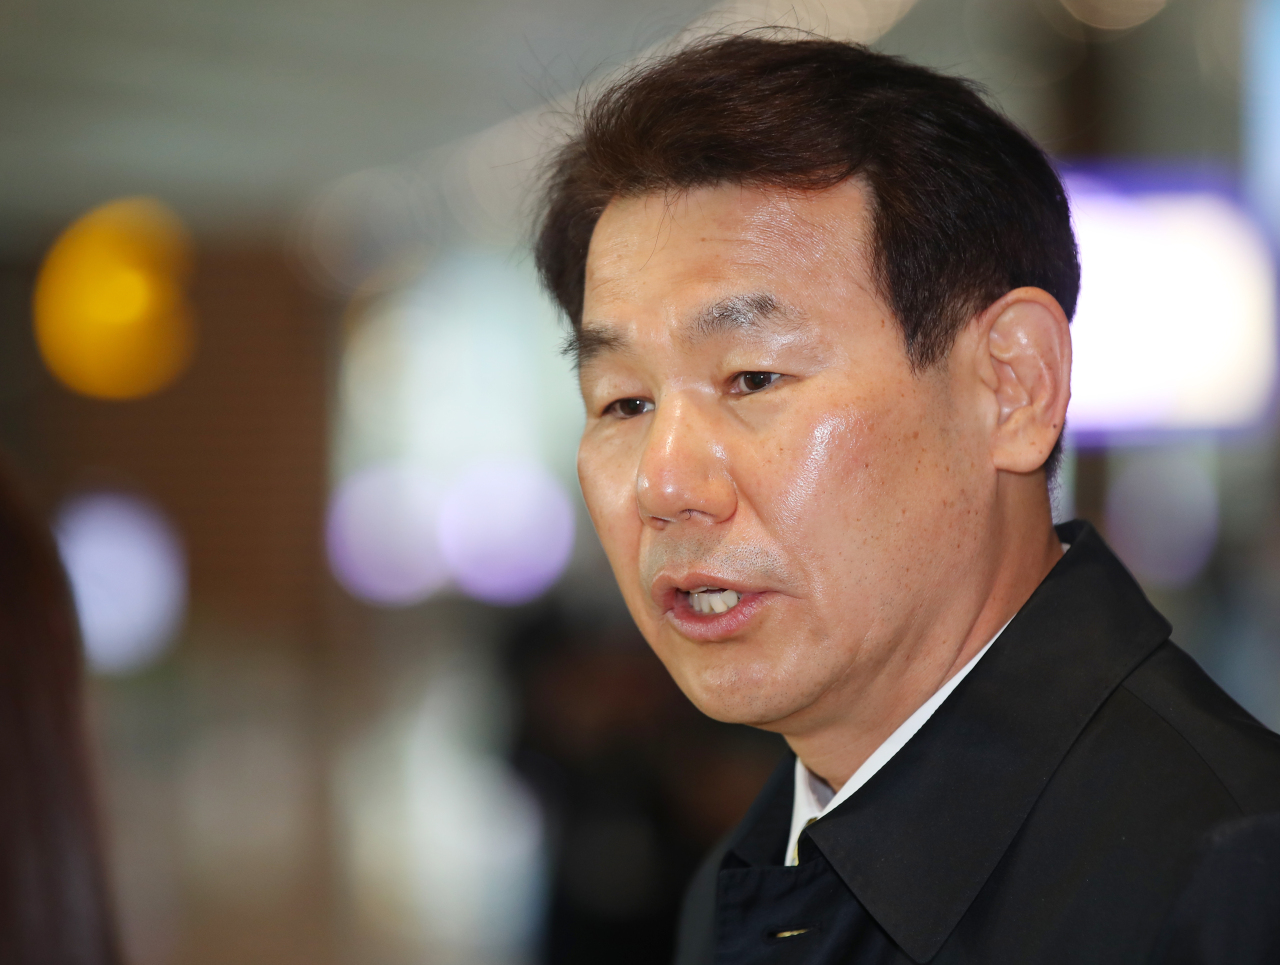 Jeong Eun-bo, South Korea's chief negotiator in defense cost-sharing talks with the US, speaks to reporters at Incheon International Airport on Thursday. (Yonhap)